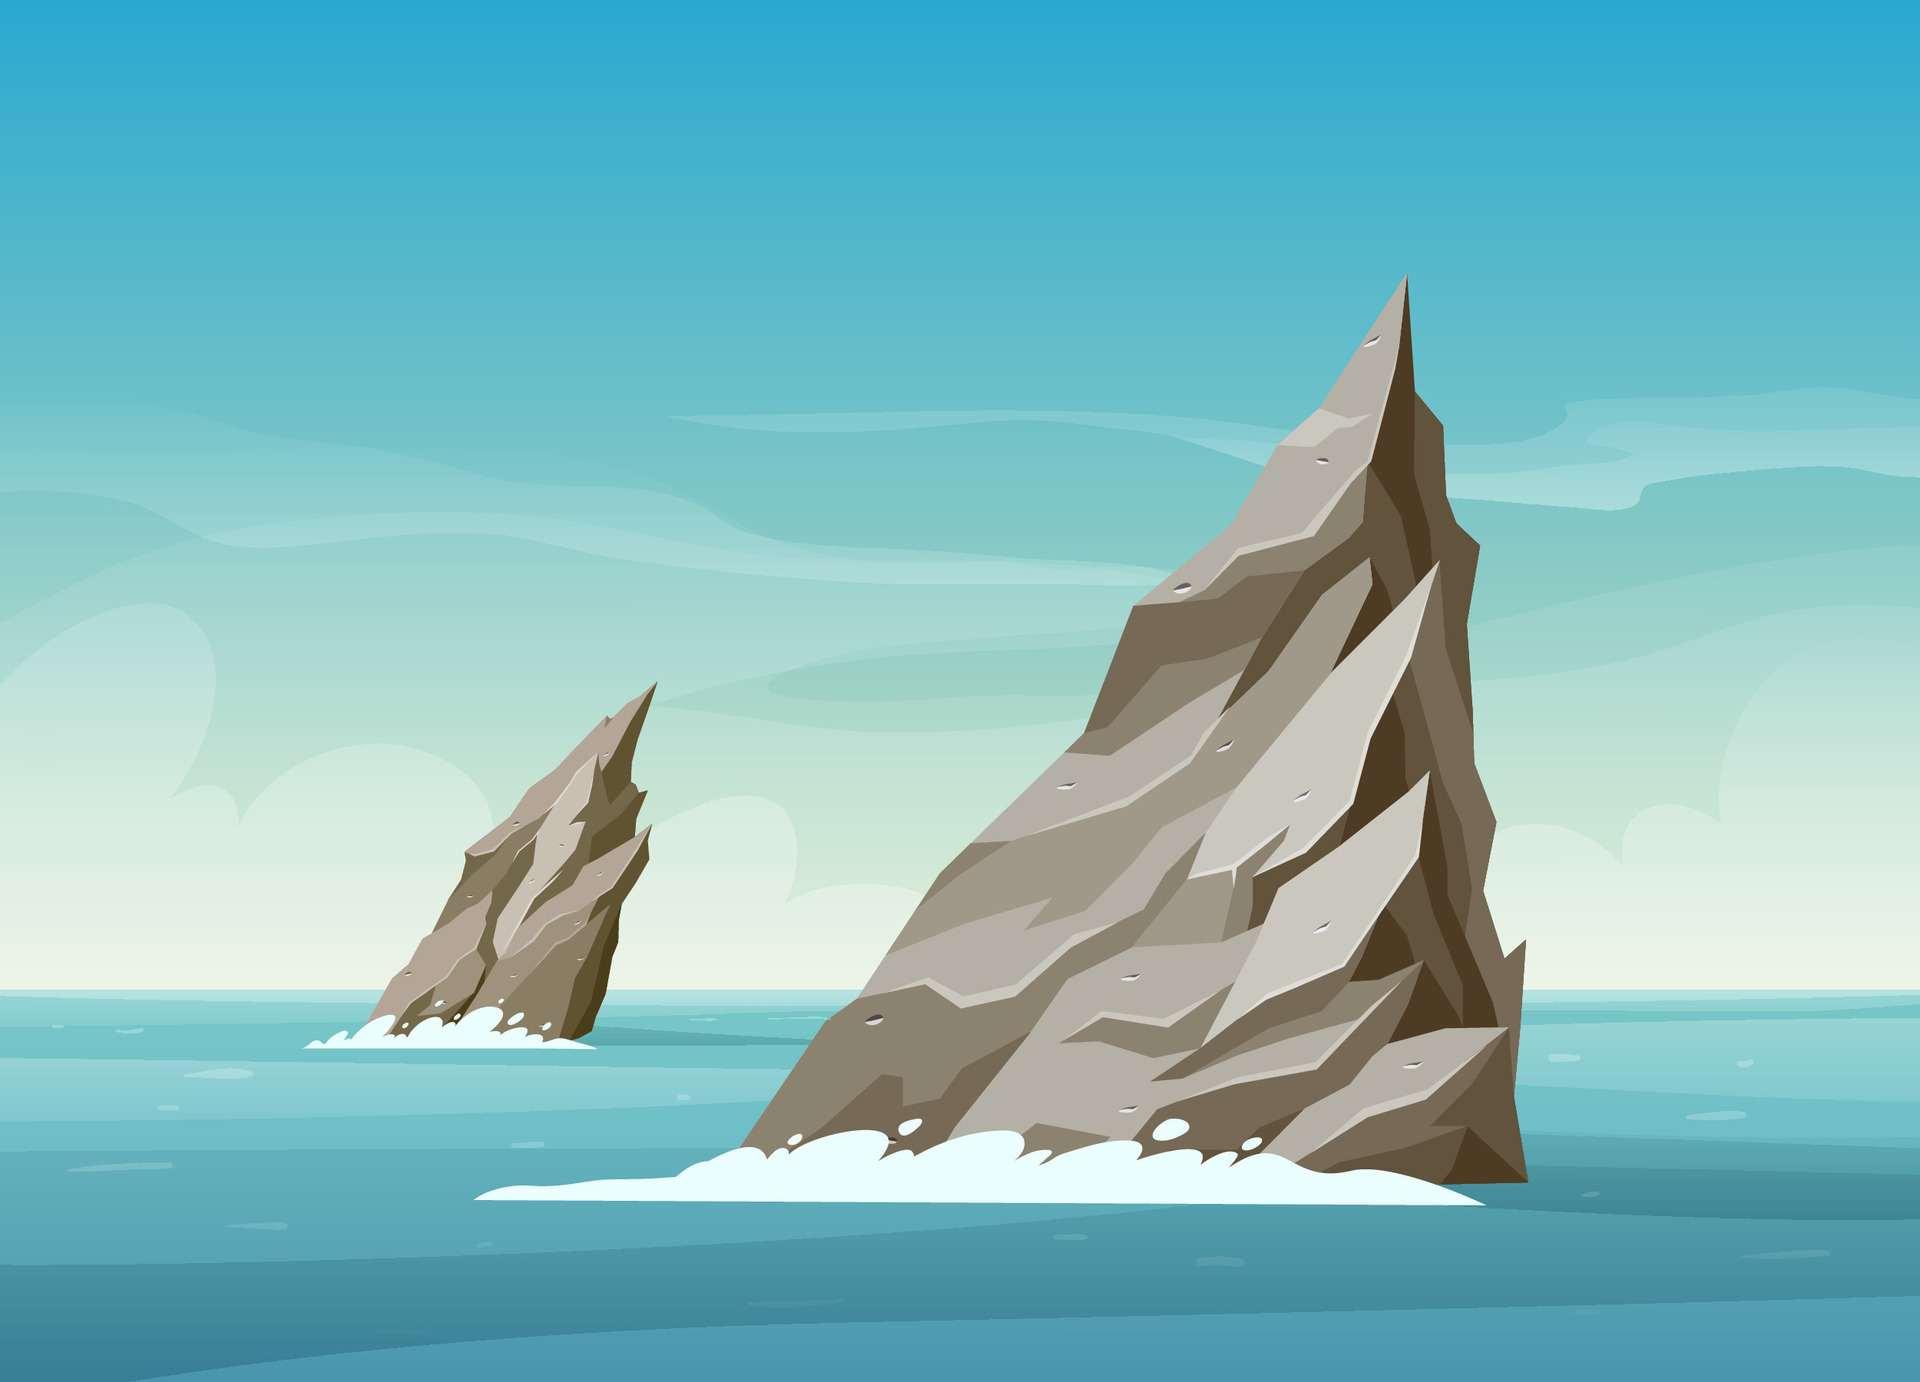 https://static.vecteezy.com/system/resources/previews/027/175/700/original/landscape-illustration-of-a-sharp-rocks-in-the-middle-of-the-sea-vector.jpg